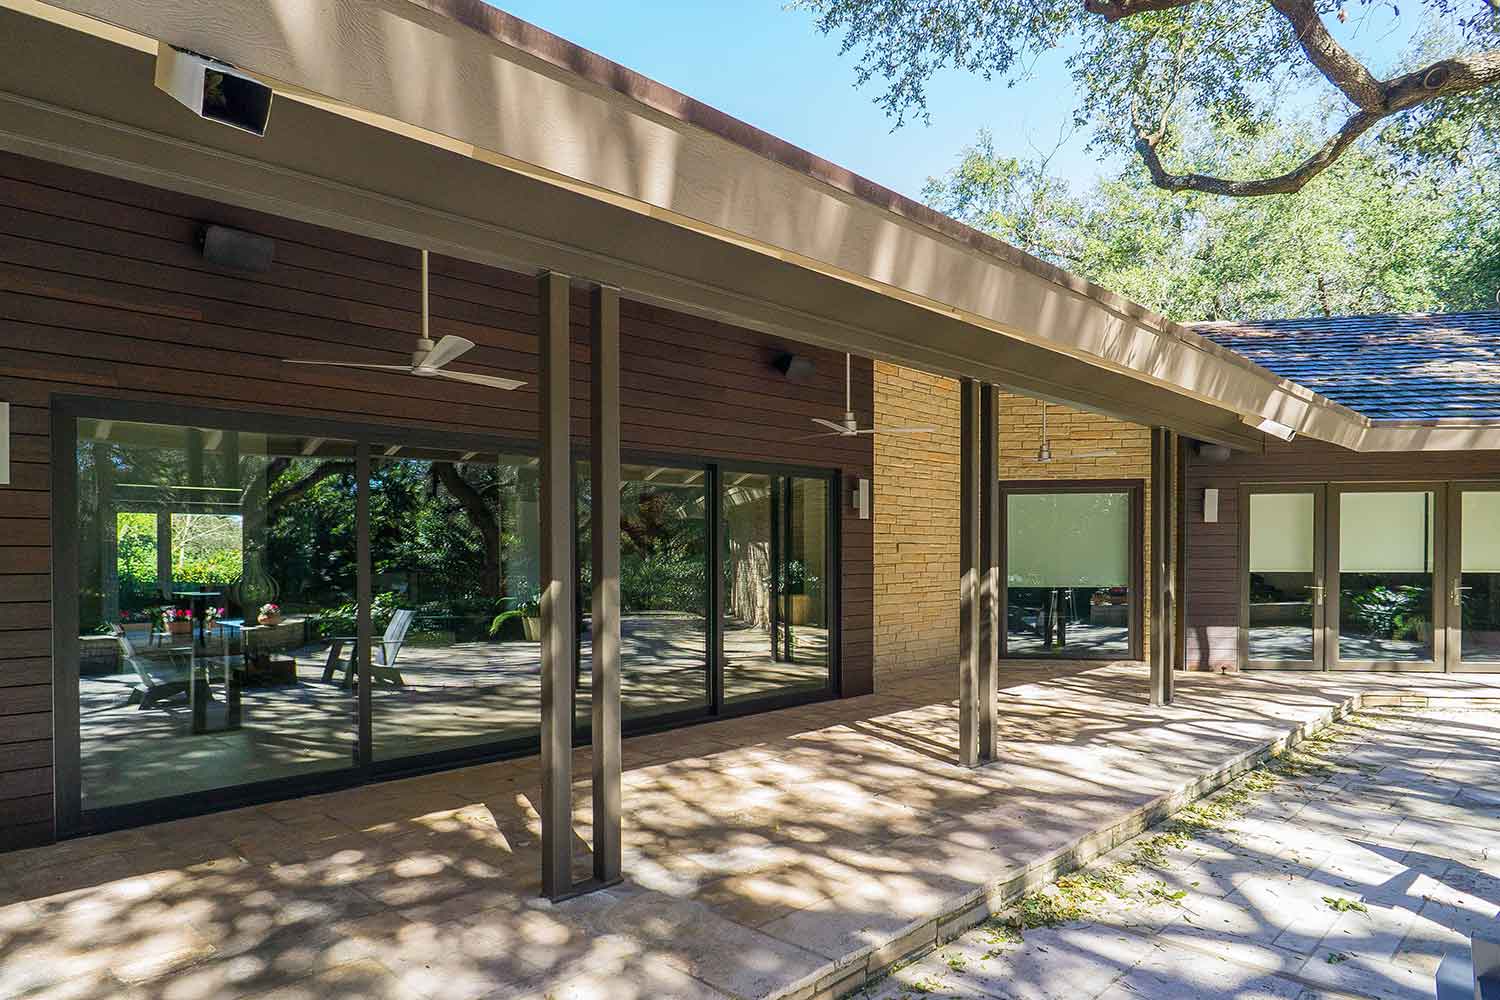 Within the vibrant neighborhood of Olmos Park in San Antonio, Texas, rests this beautiful ranch-style stone home.  When architect Elizabeth D. Haynes was given the task of designing the remodel and new addition to the home, she turned to Voyles Orr Construction to make the dream a reality.  Haynes chose dassoXTR RainClad Siding for the exterior around the home. This product is made from Fused Bamboo® that uses a clip system to produce a seamless rainscreen siding.  The equally stunning and strong Ipe-like appearance gives a wonderful contrast to the stone exterior.